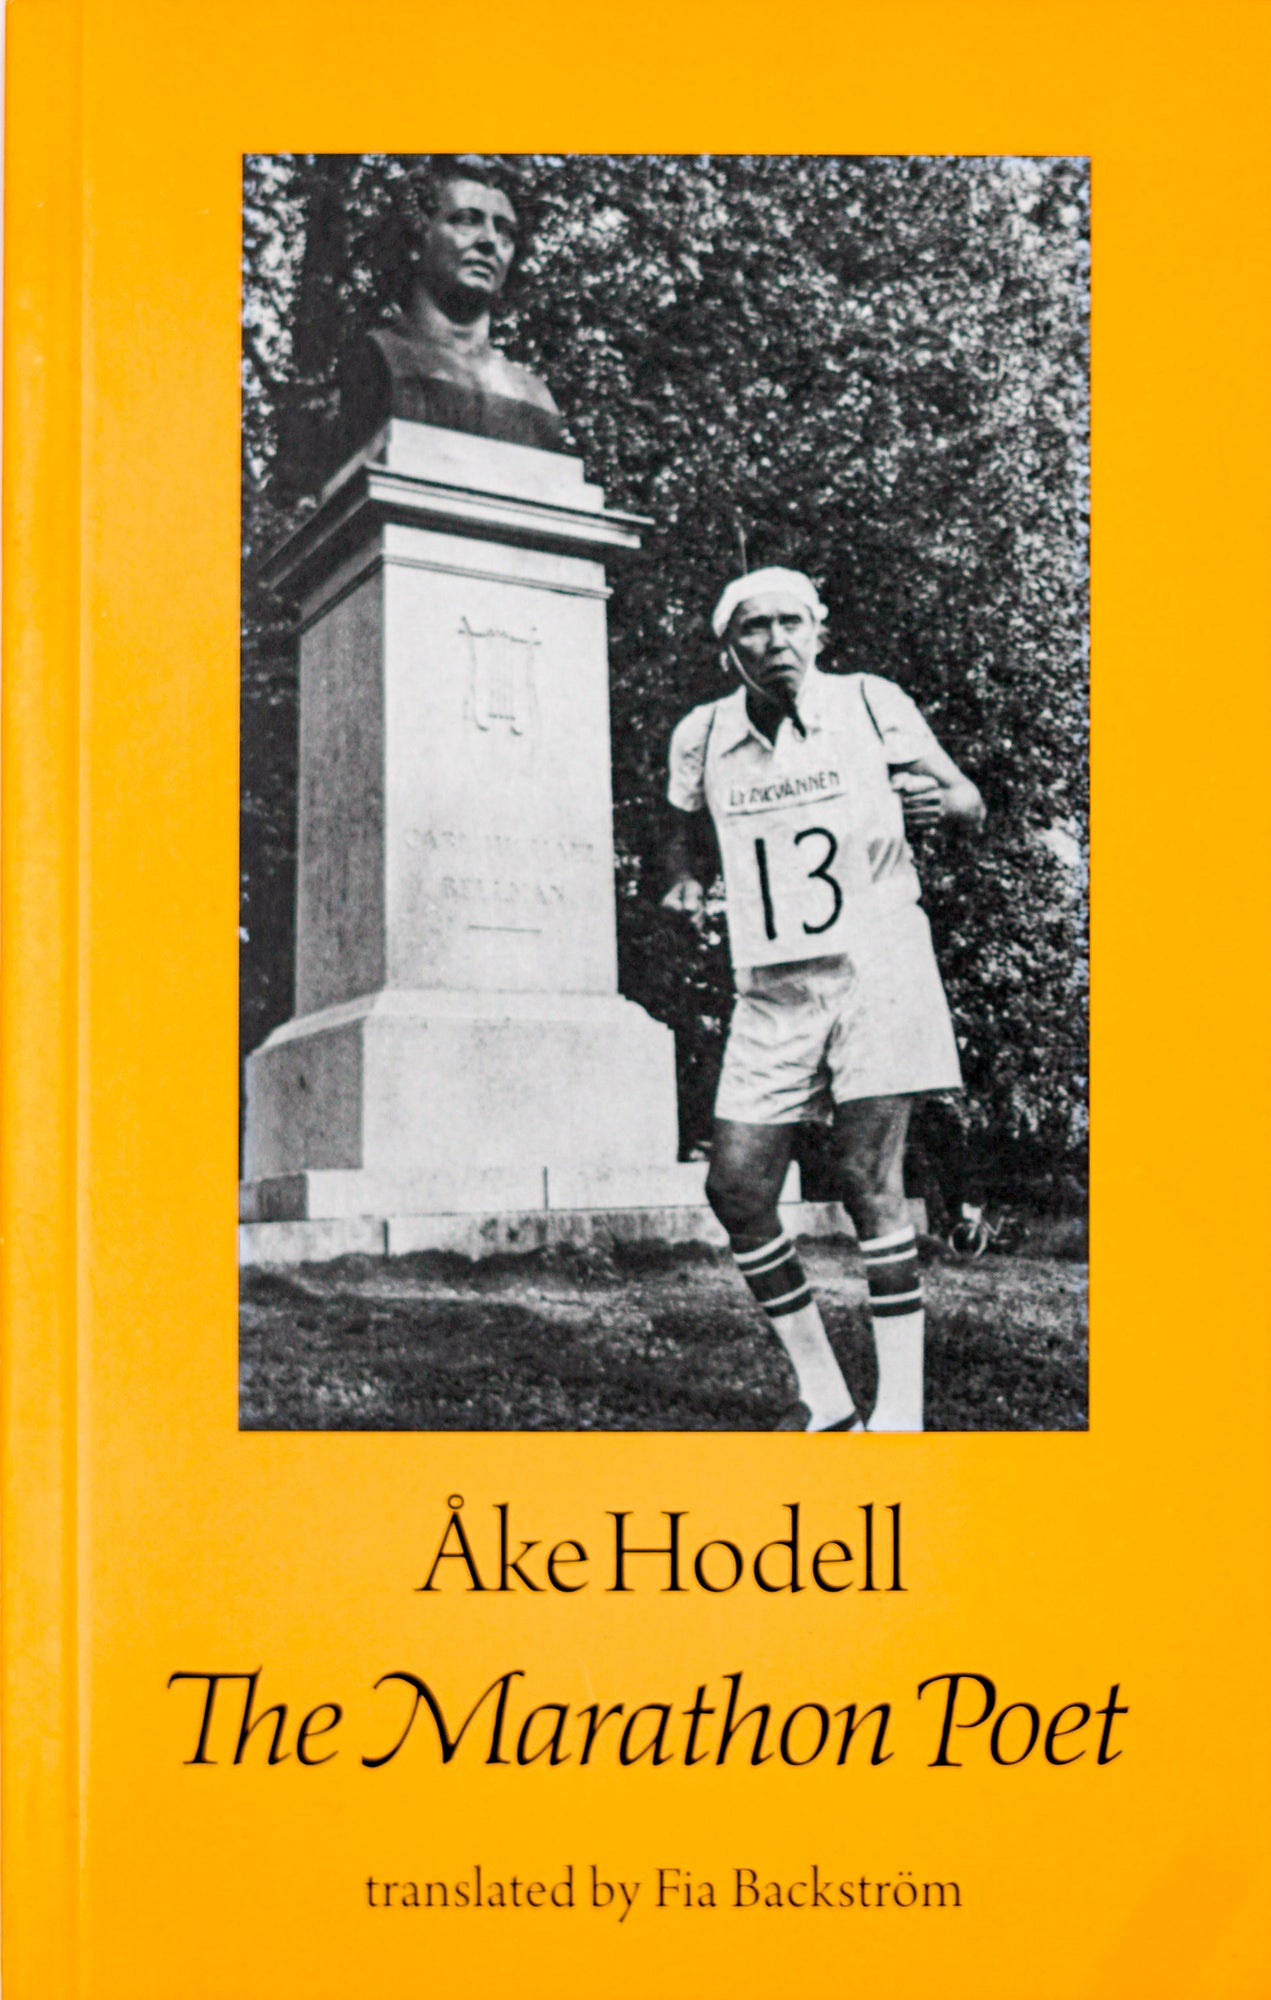 Book Cover in light orange with a black and white photography central on the page. The picture shows an elderly person in front of a tombstone in sports clothing and a sign saying the number 13 on his chest. Below that it says the author Ake Hodell in black serif roman writing and below that the title The Marathon Poet in black serif italic.